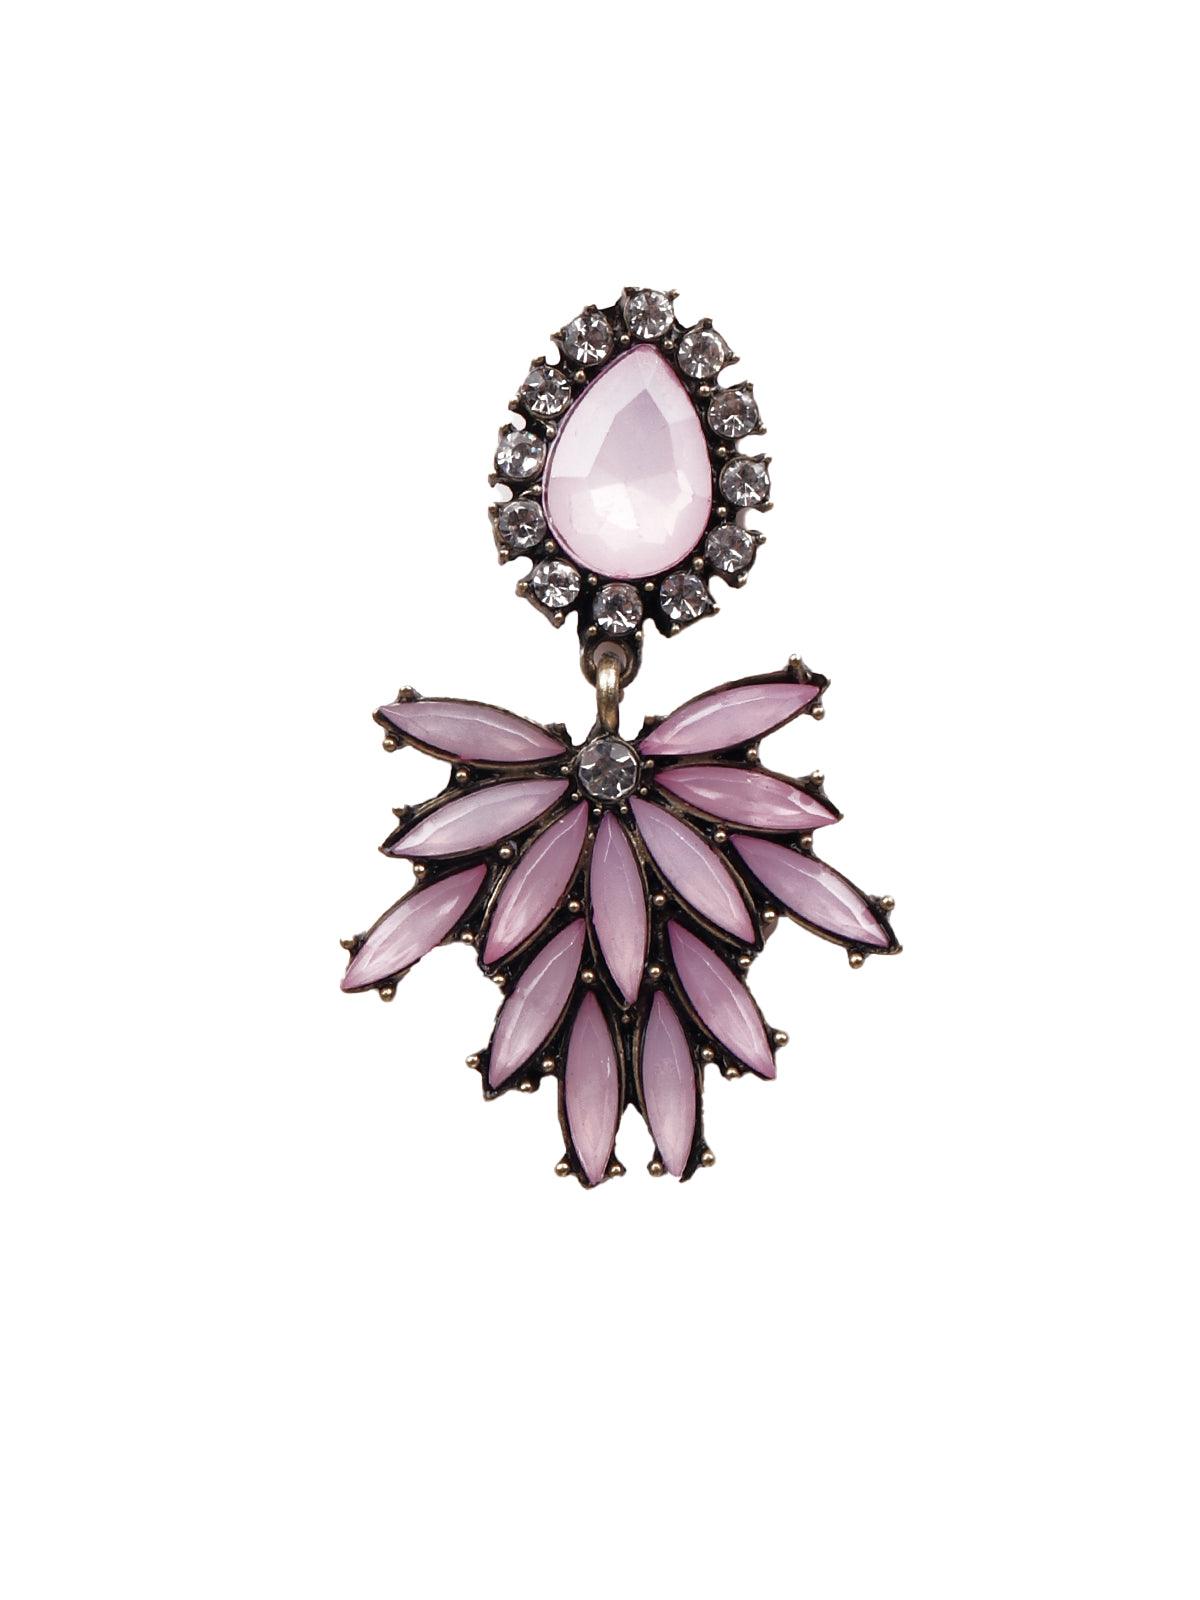 Gorgeous lilac artificial stone elegant earrings - Odette